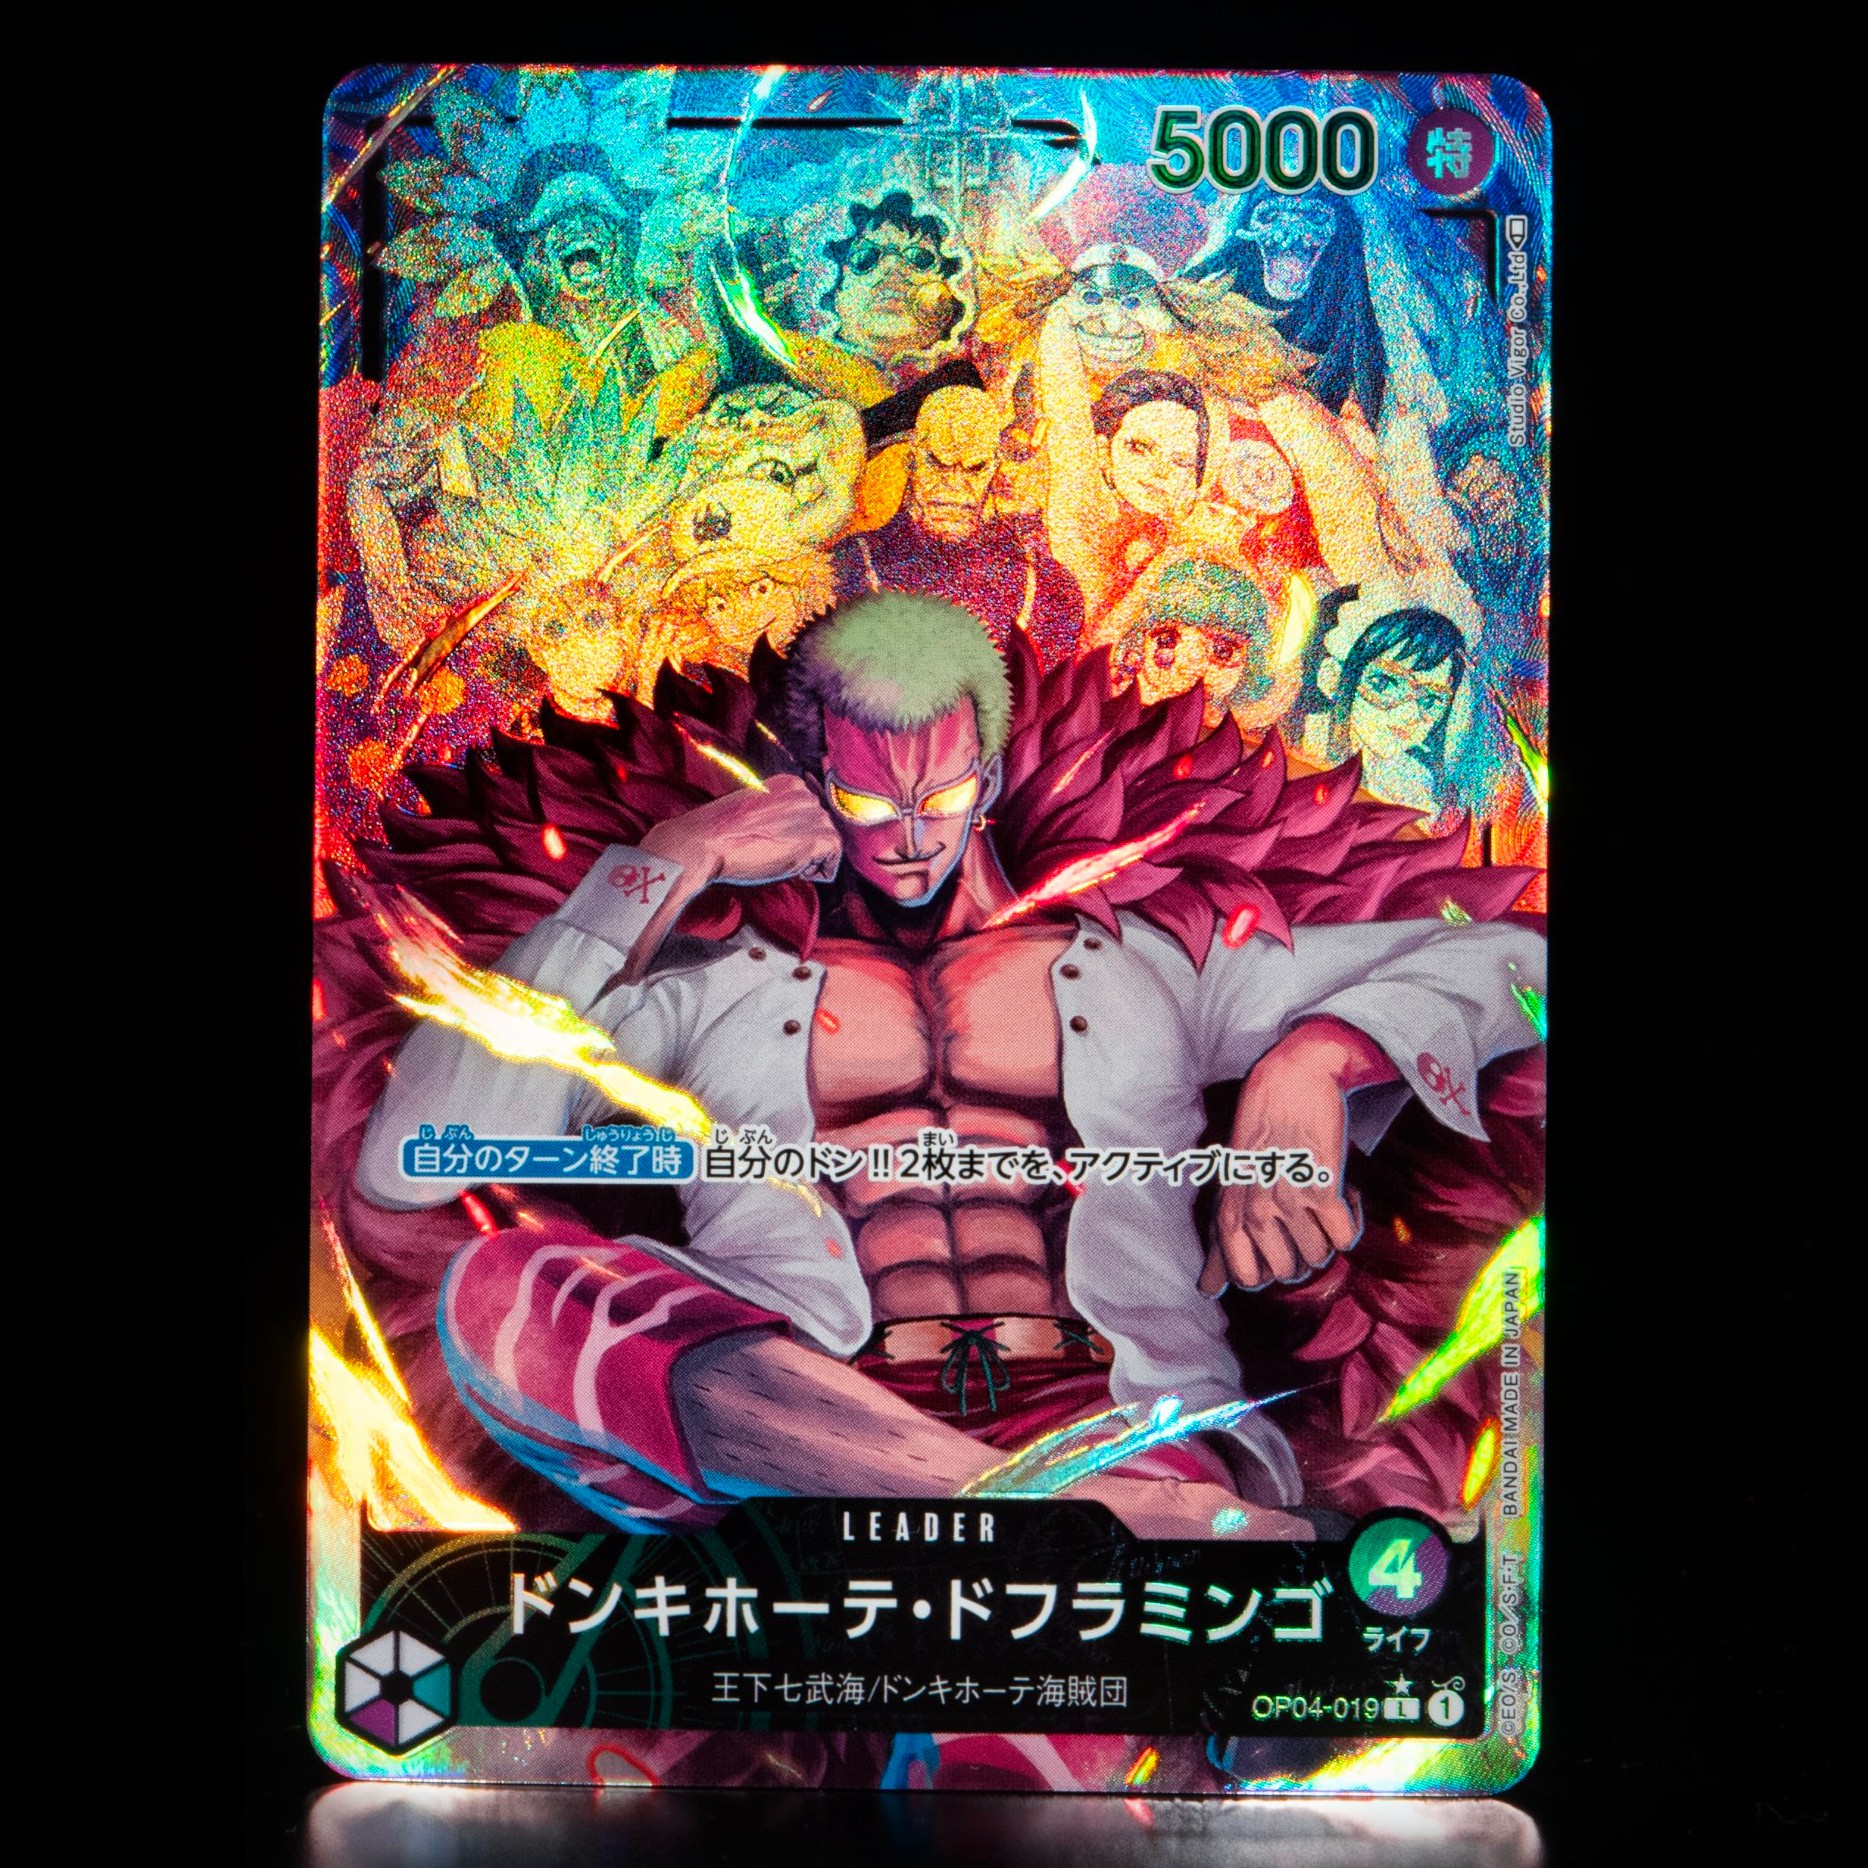 ONE PIECE CARD GAME ｢Kingdoms of Intrigue｣  ONE PIECE CARD GAME OP04-019 Leader Parallel card  Donquixote Doflamingo